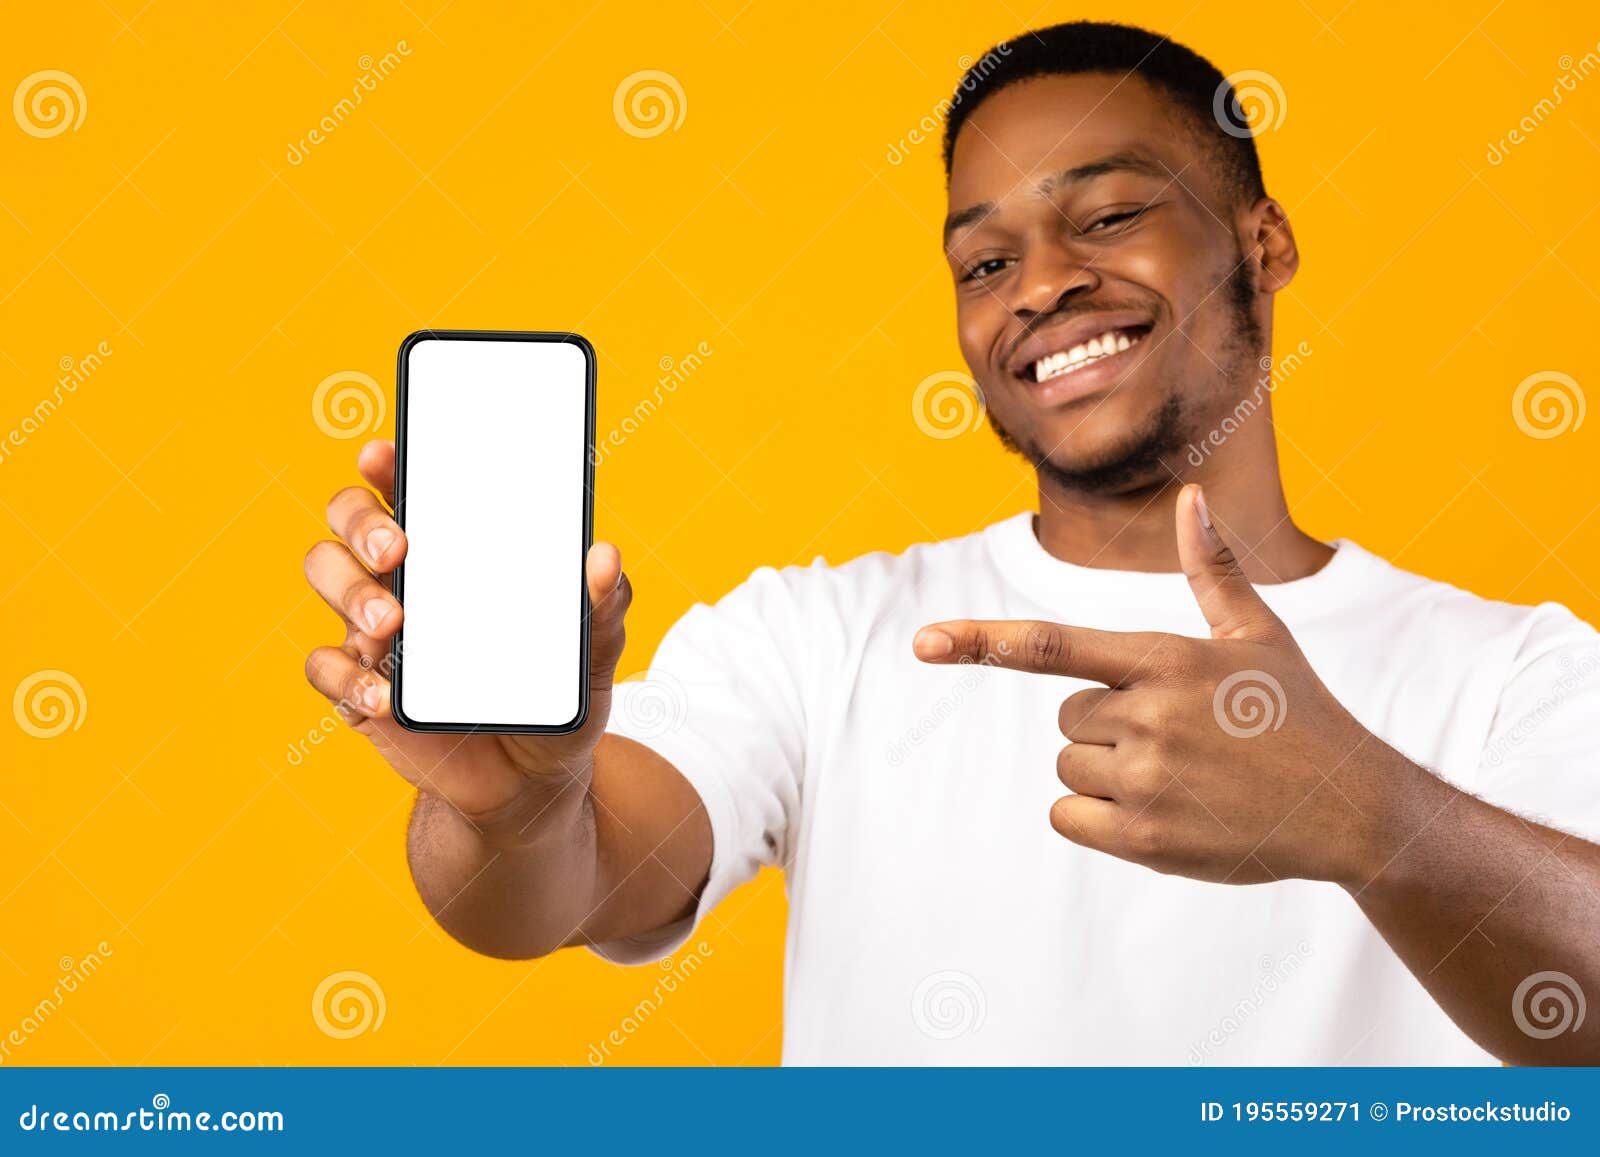 african american man showing mobile phone screen, yellow background, mockup